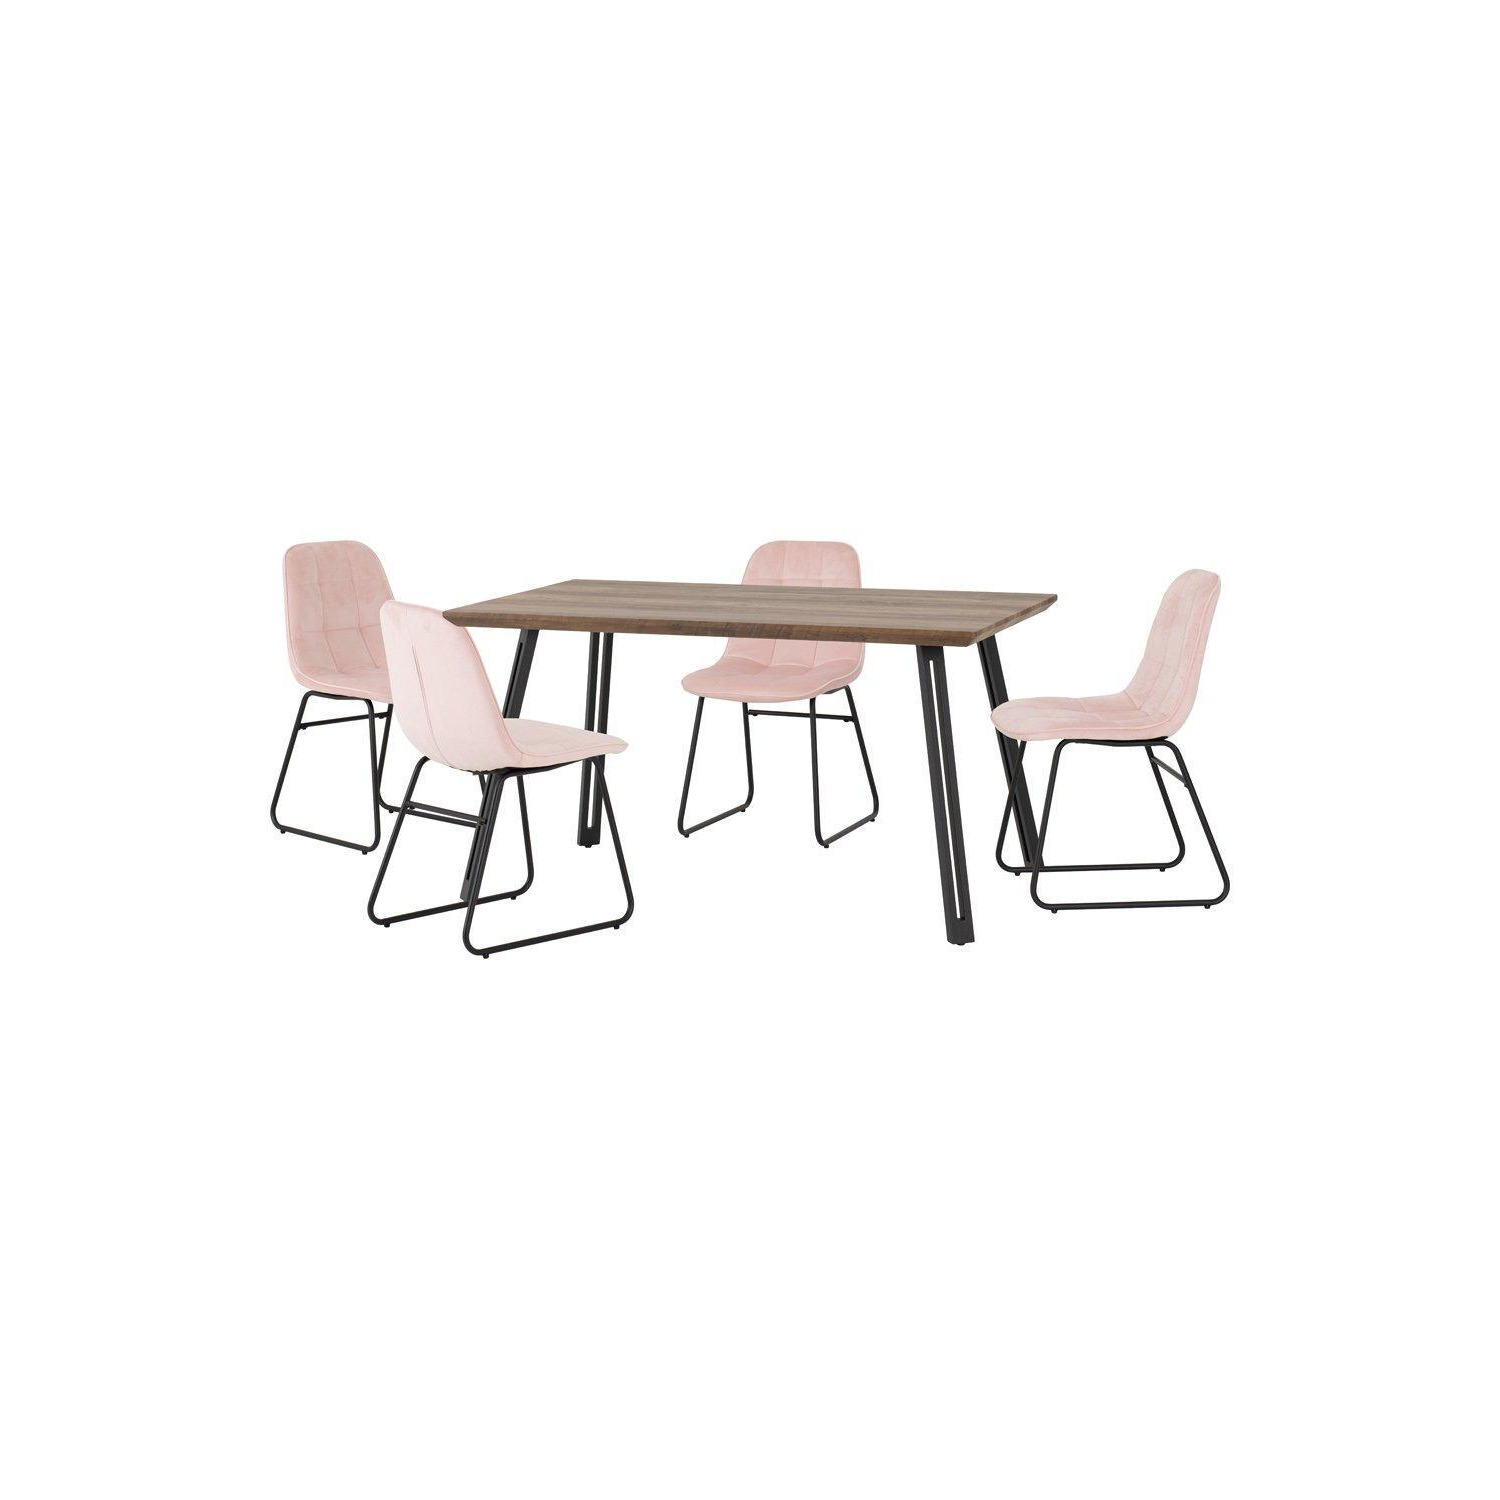 Quebec Straight Edge Dining Set with Lukas Chairs - image 1